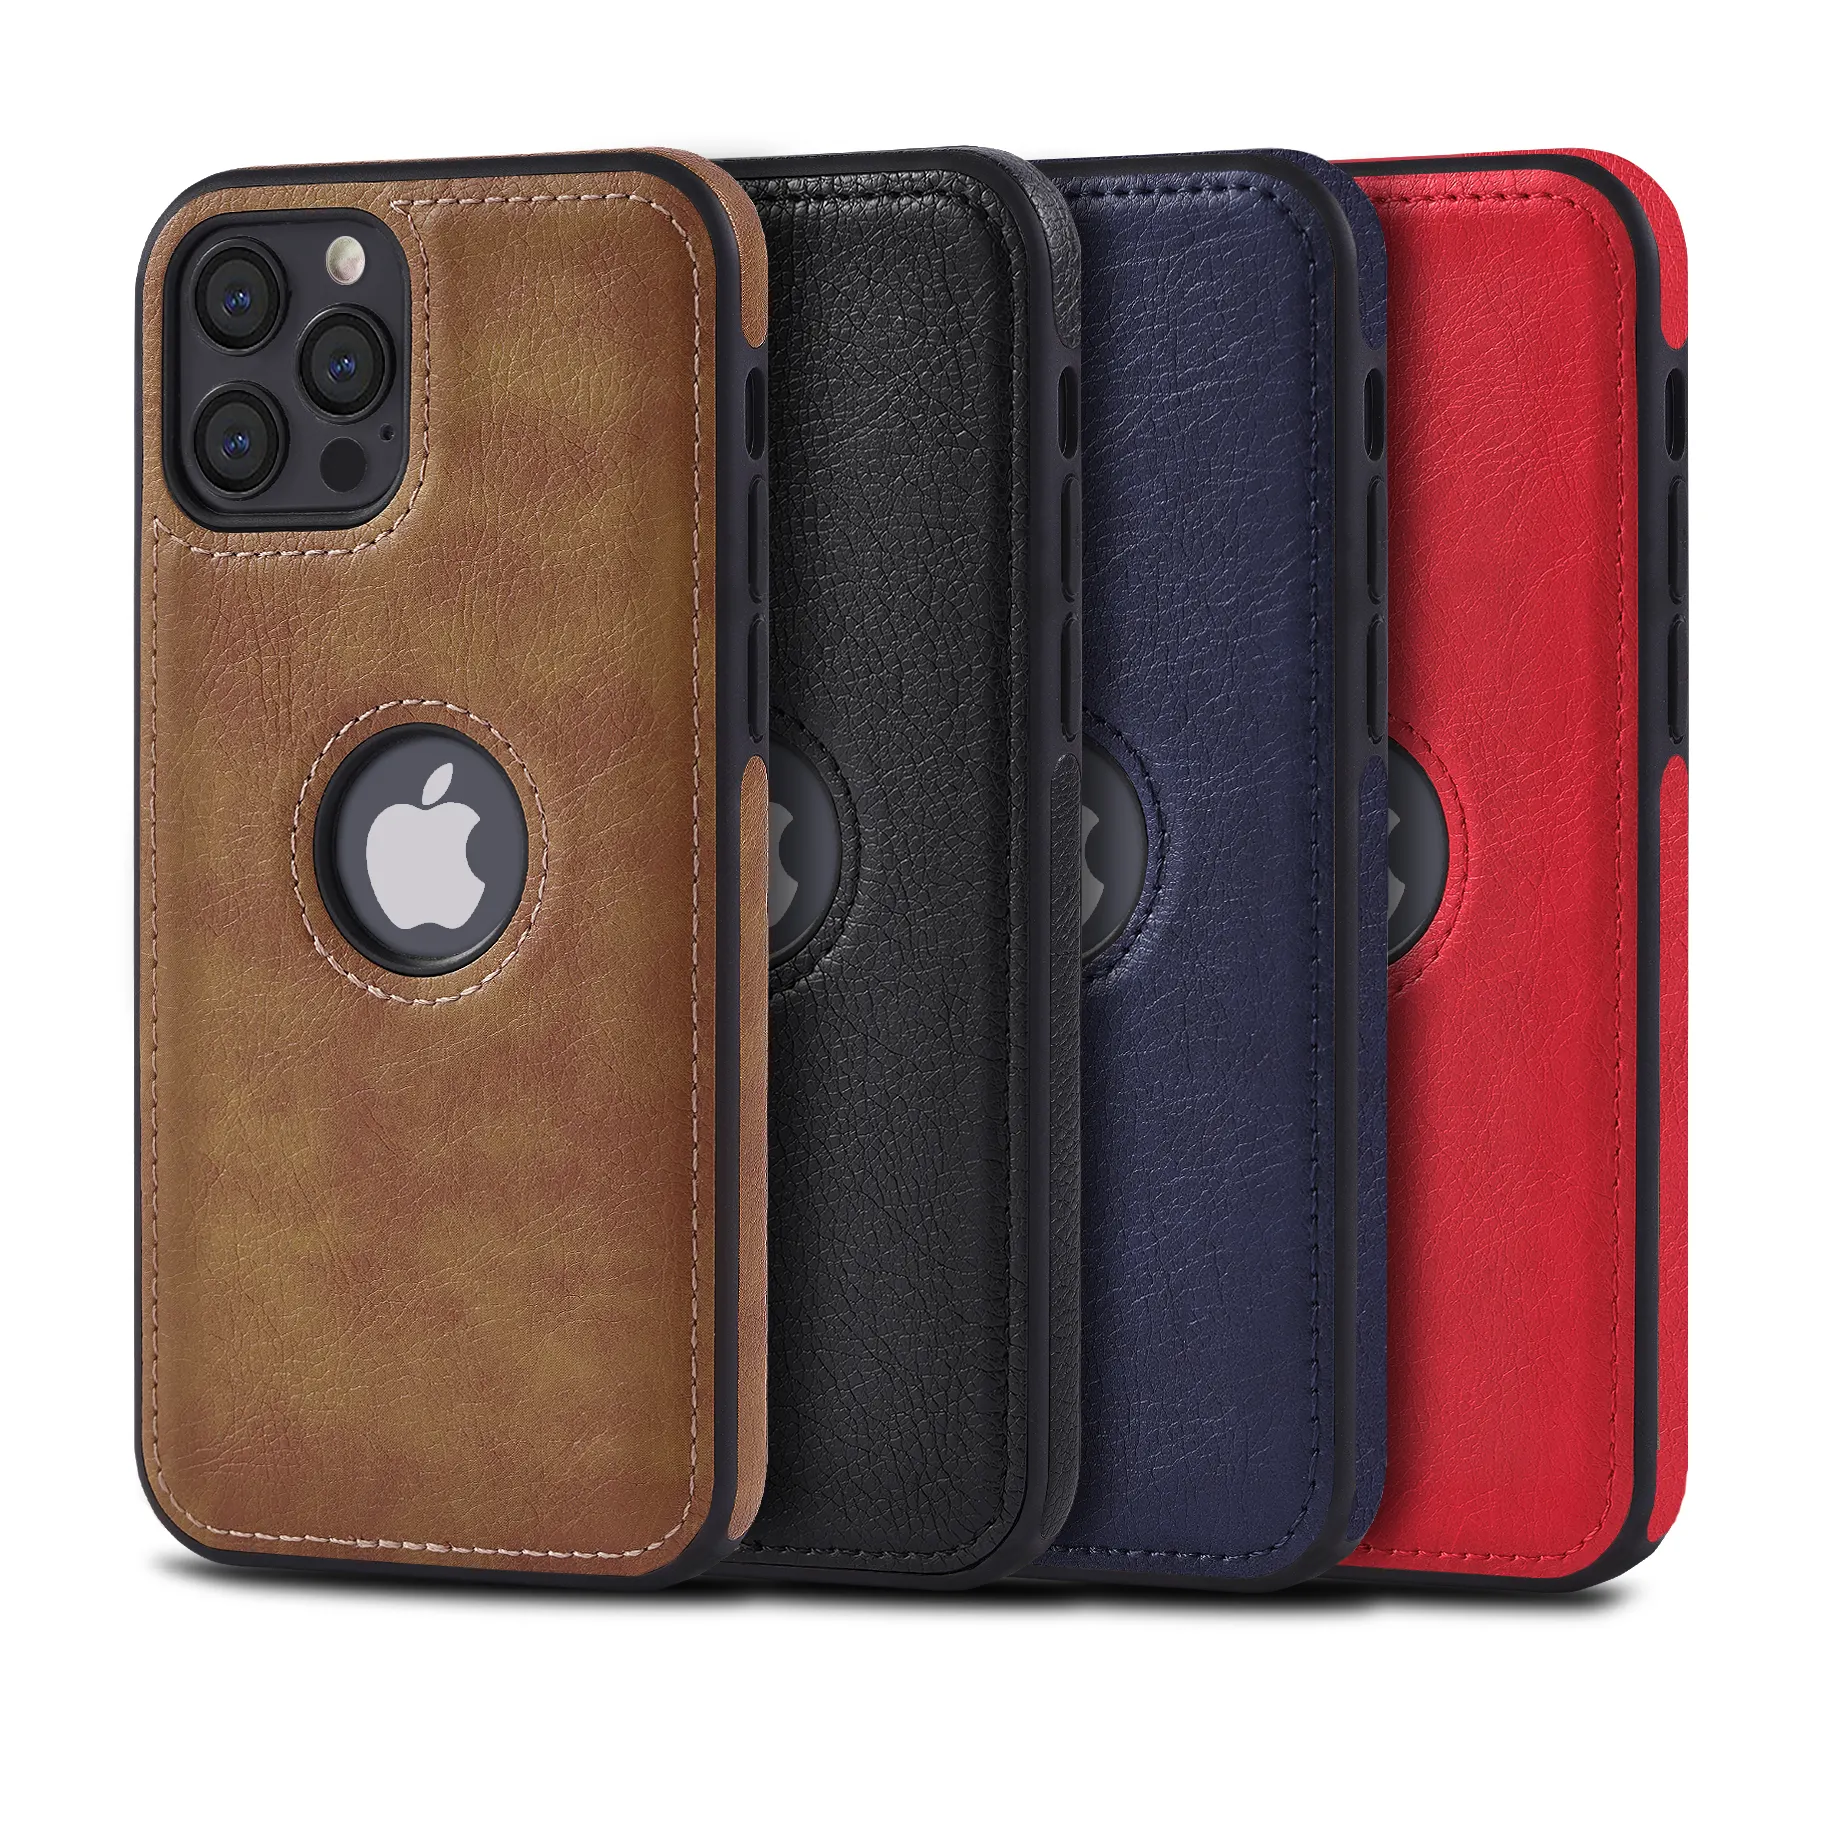 2022 Hot Designer Phone Cases with logo hole Luxury Fashion Brand Cell Phone Leather Case for Apple iPhone 11 12 13 Pro Max mini